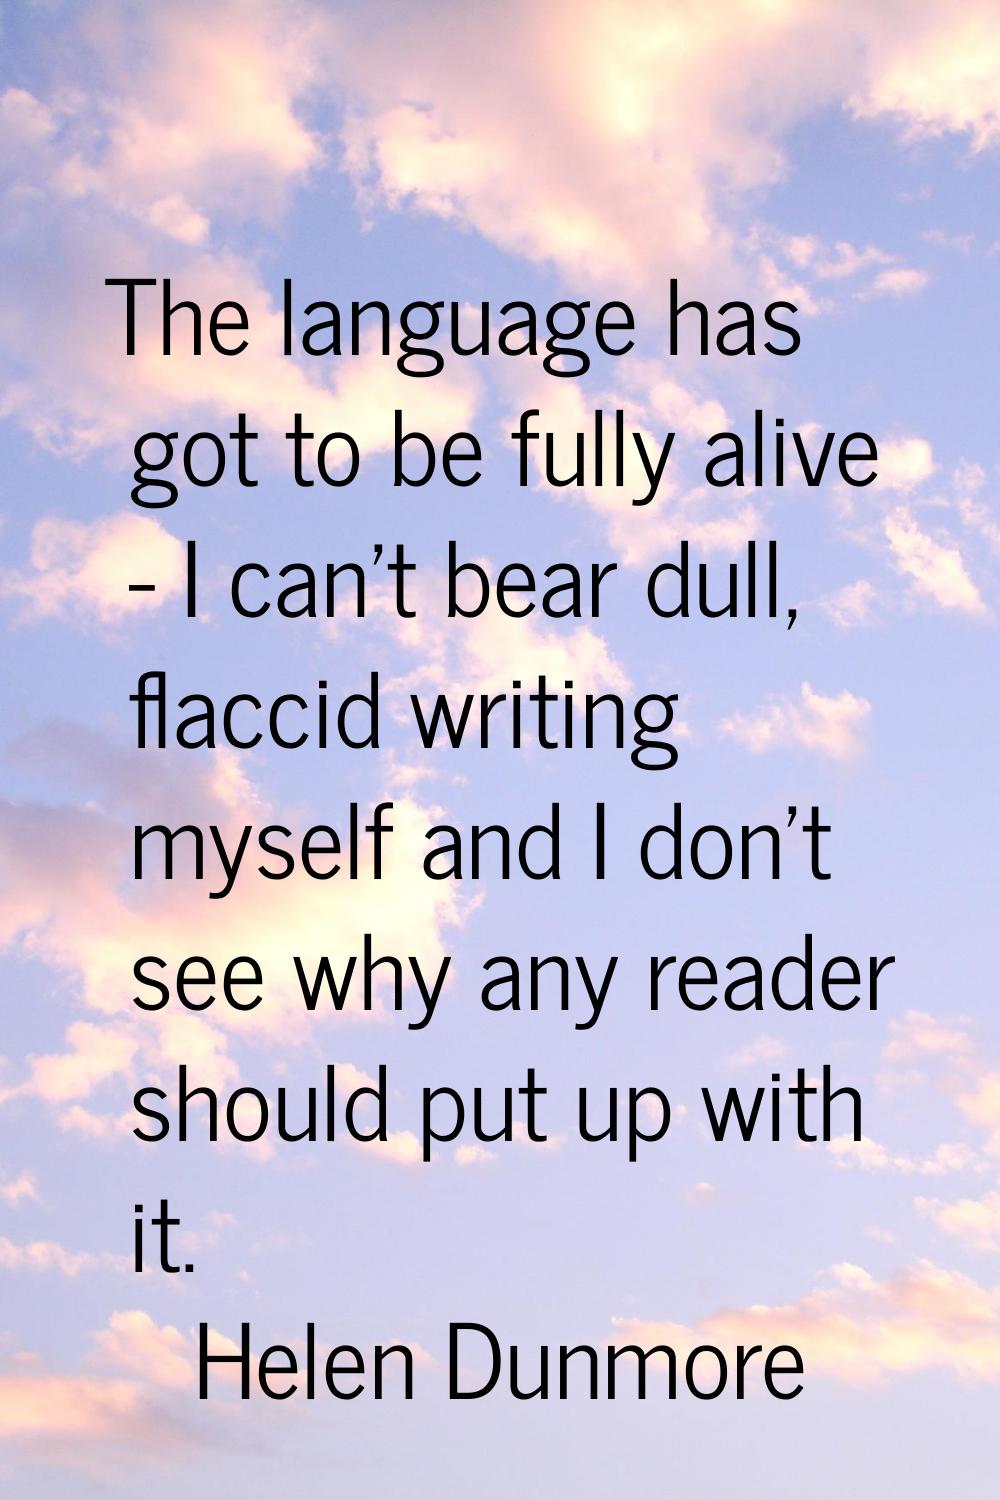 The language has got to be fully alive - I can't bear dull, flaccid writing myself and I don't see 